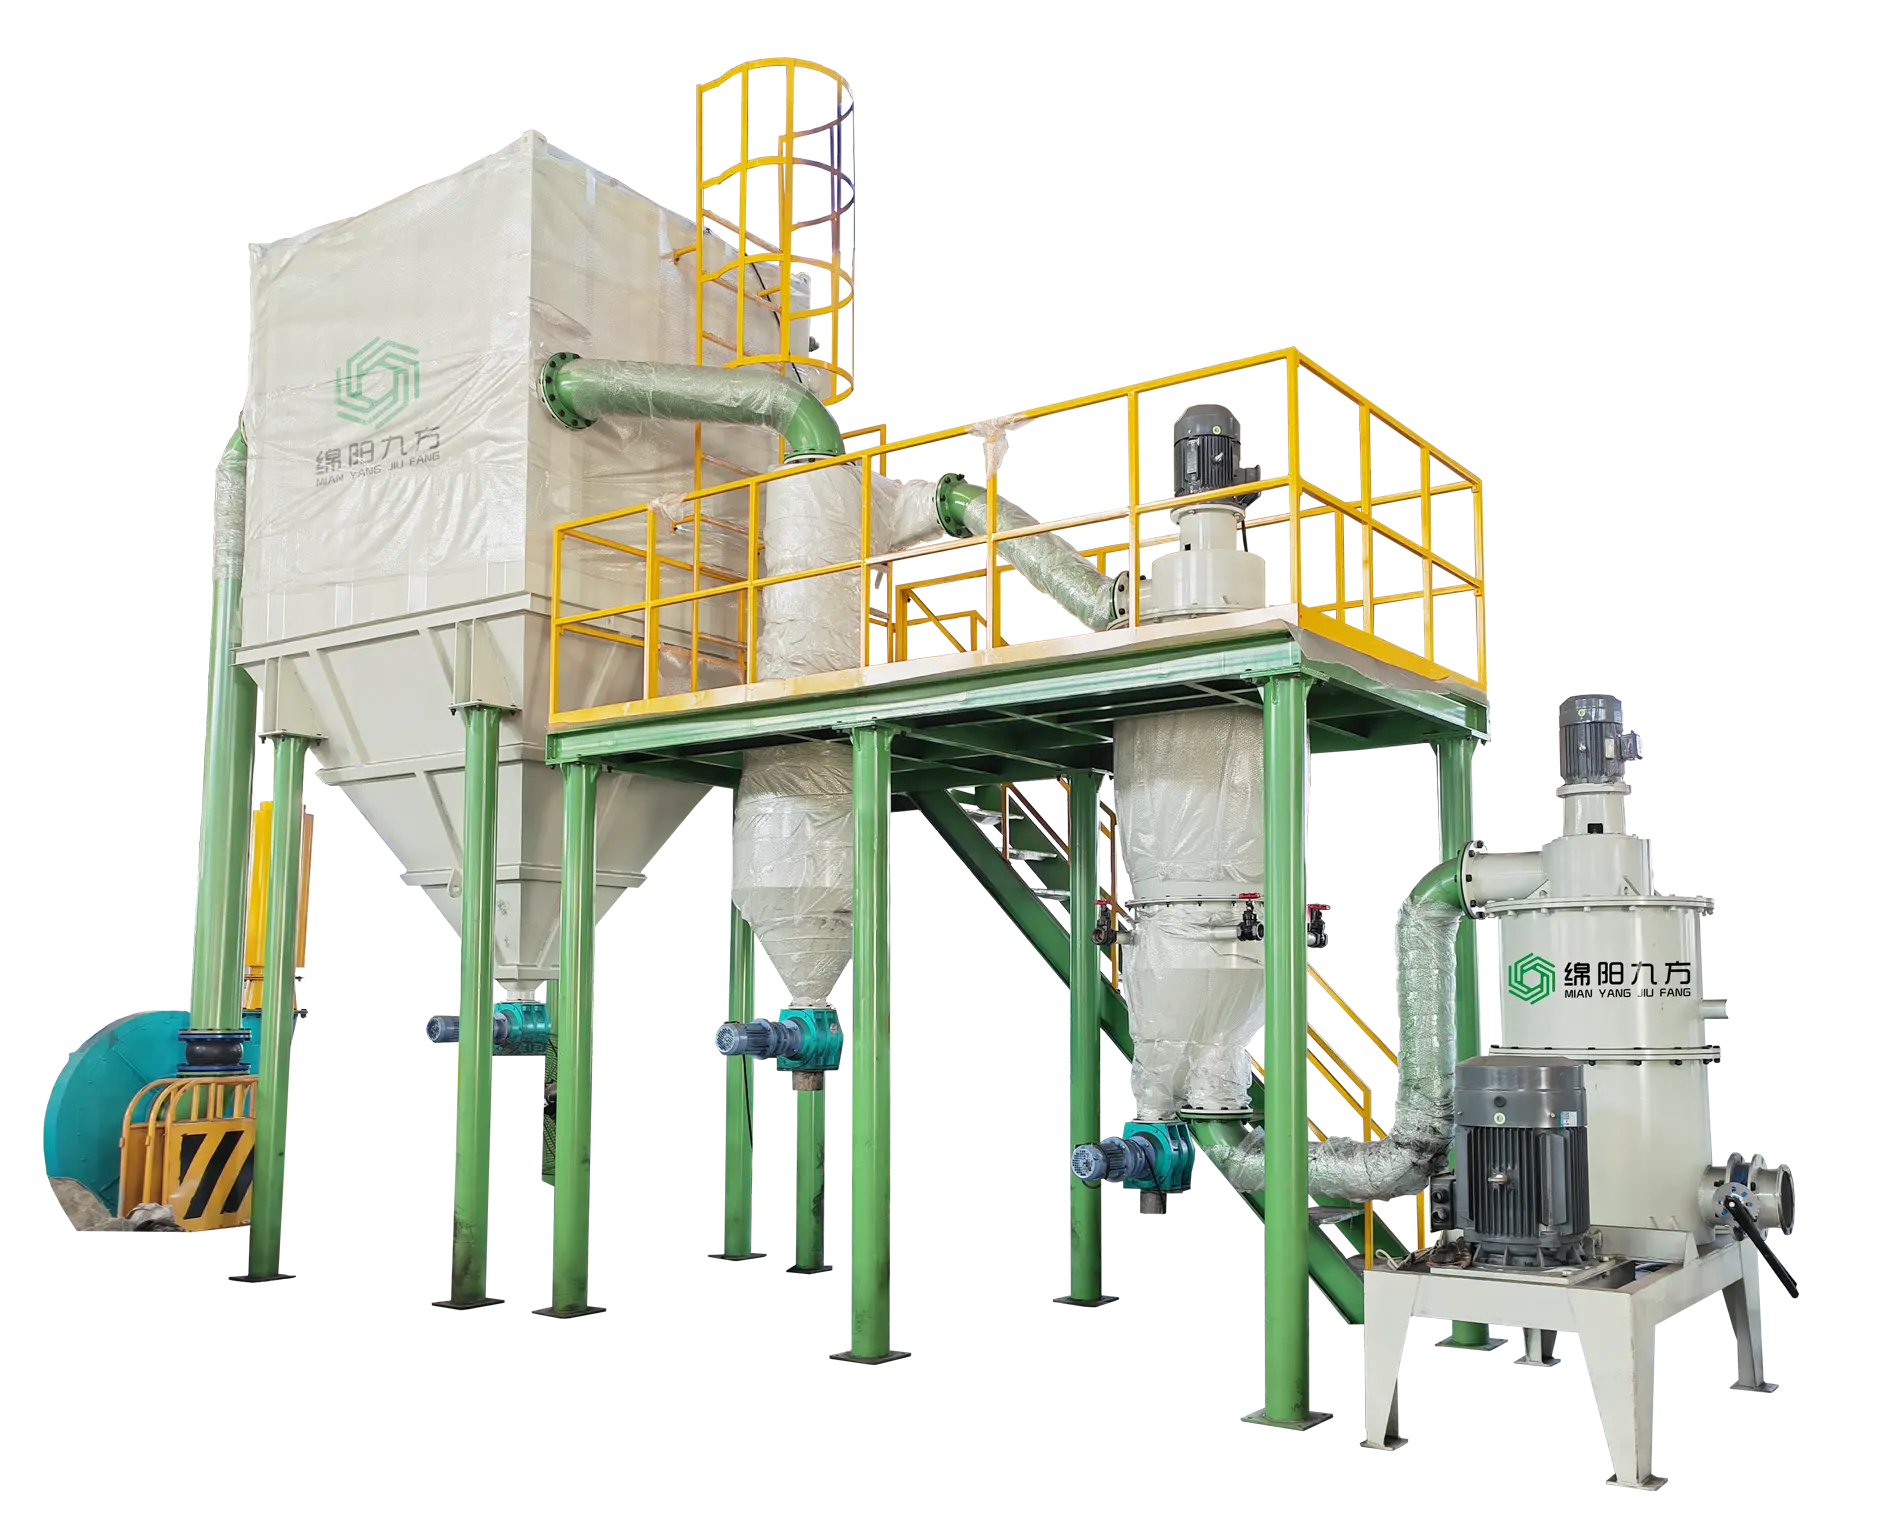 China Negative Electrode Materials Air Classifier lmpact Mill Acm Pulverizador Machine For Chemical Industry